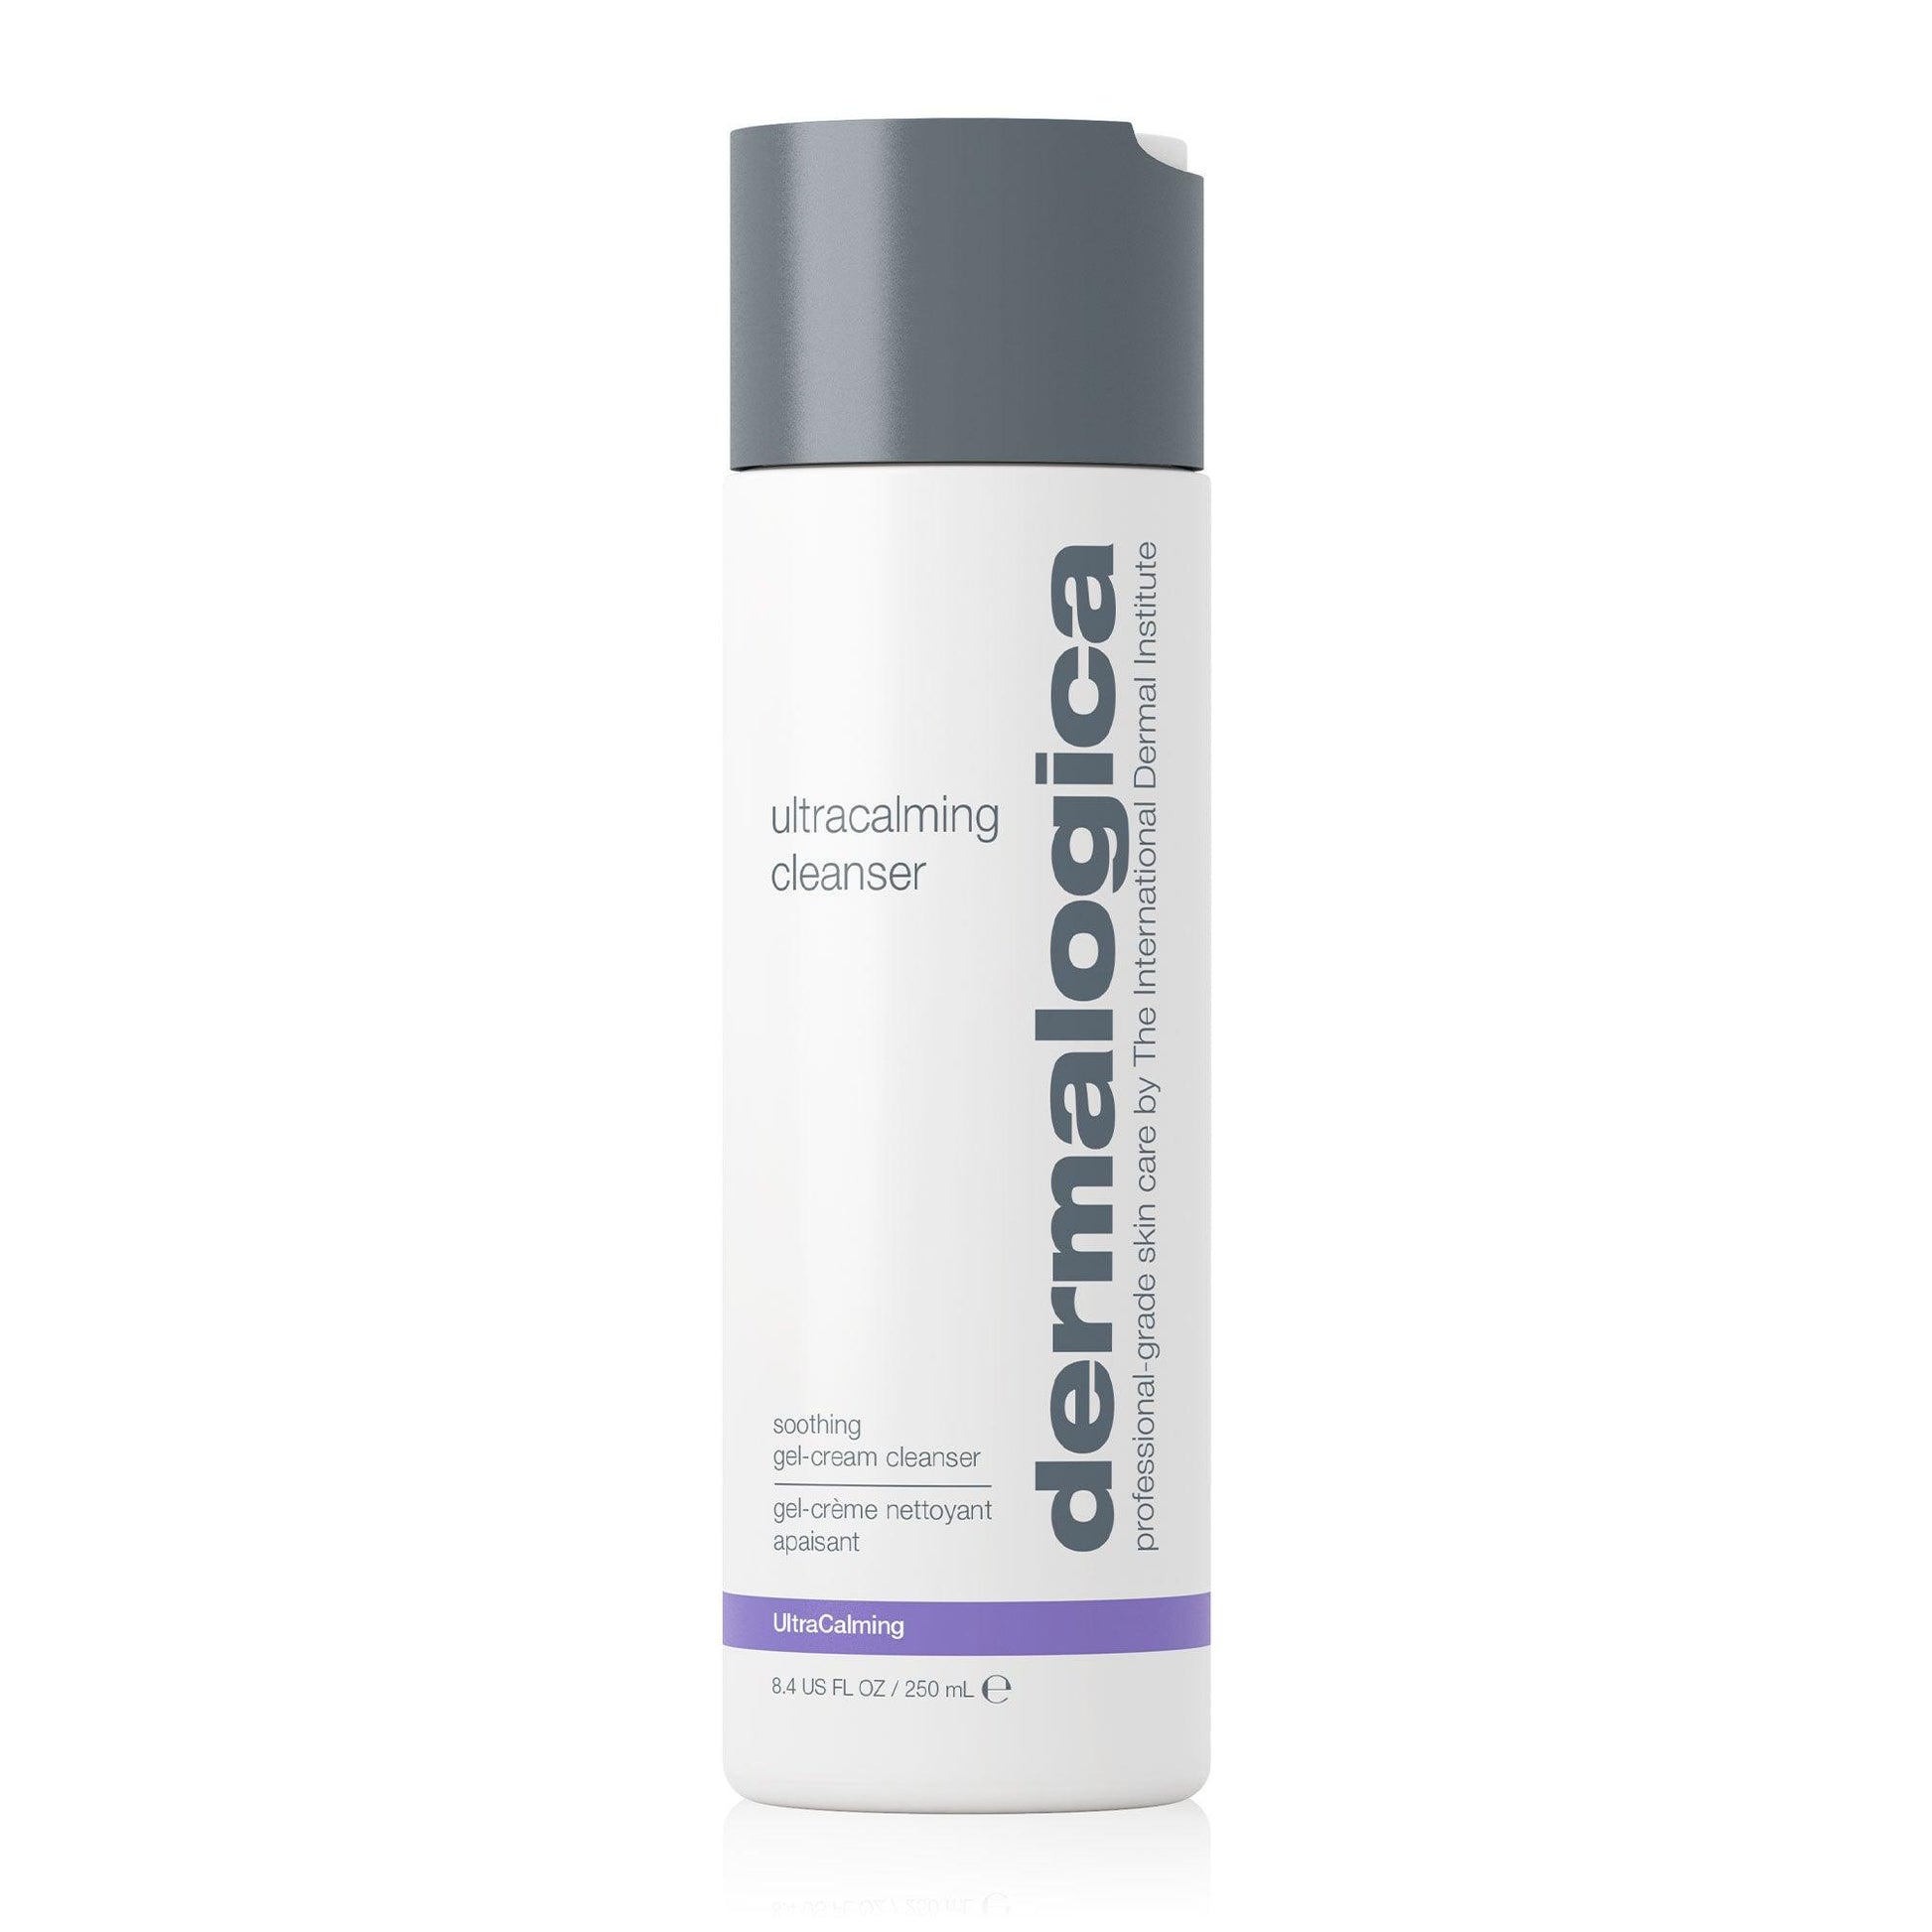 ultracalming cleanser - Dermalogica Malaysia